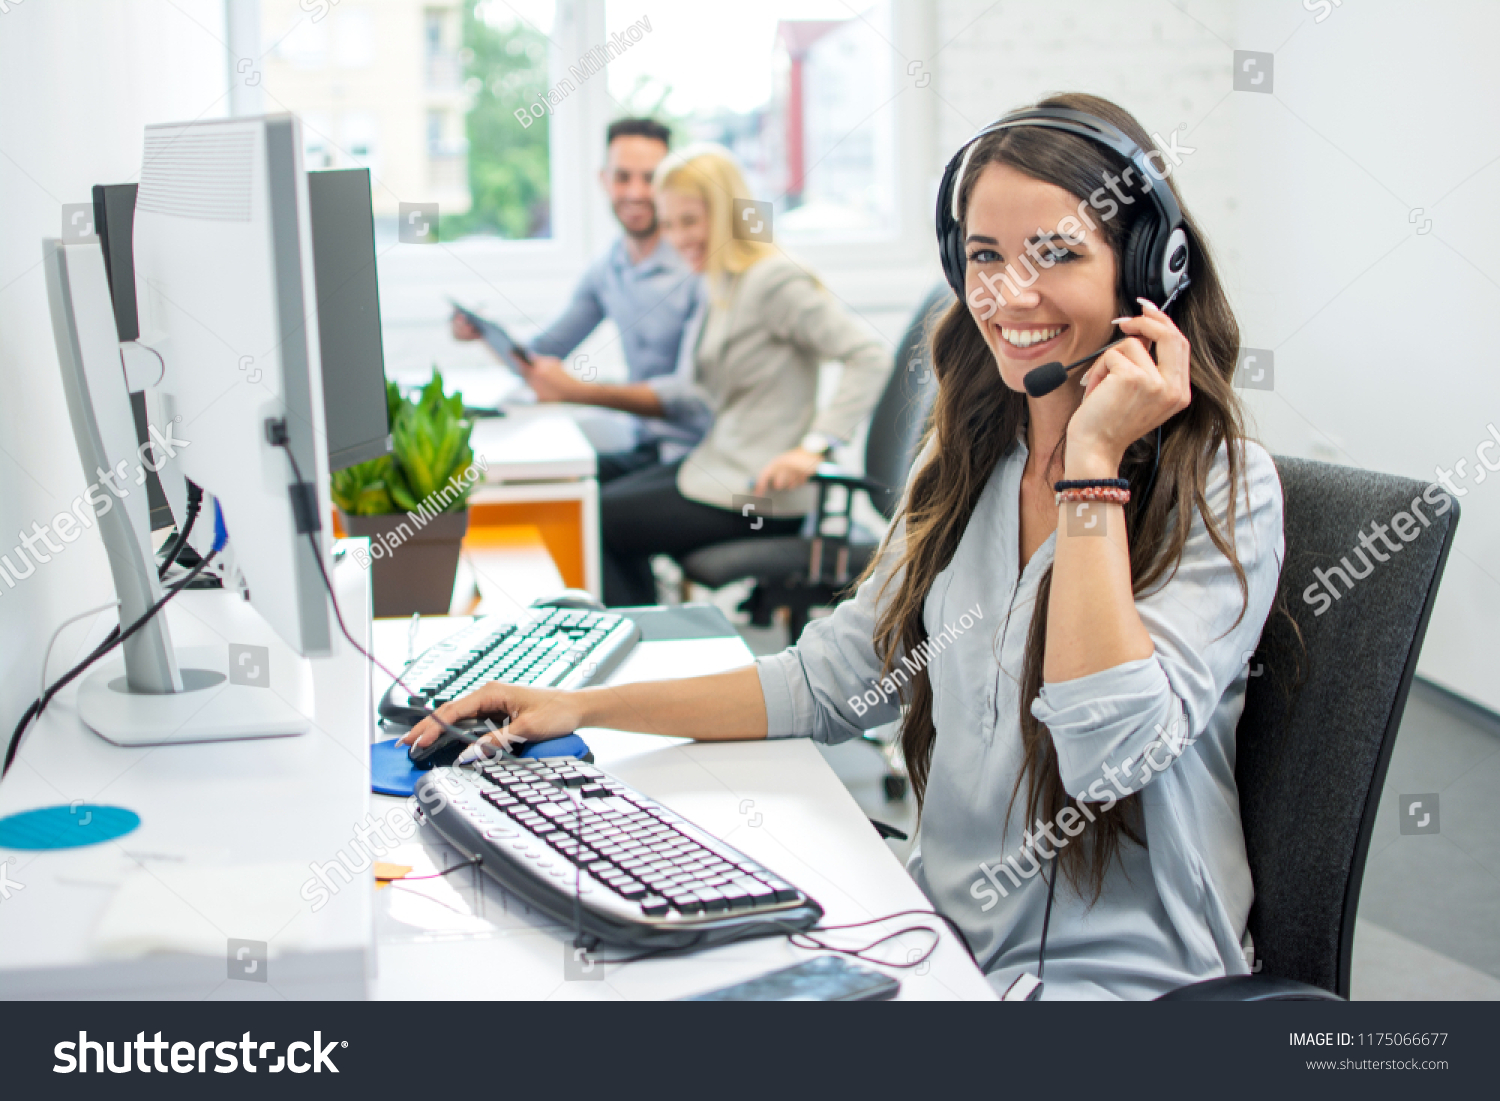 Smiling friendly female call-center agent with headset working on support hotline in the office #1175066677